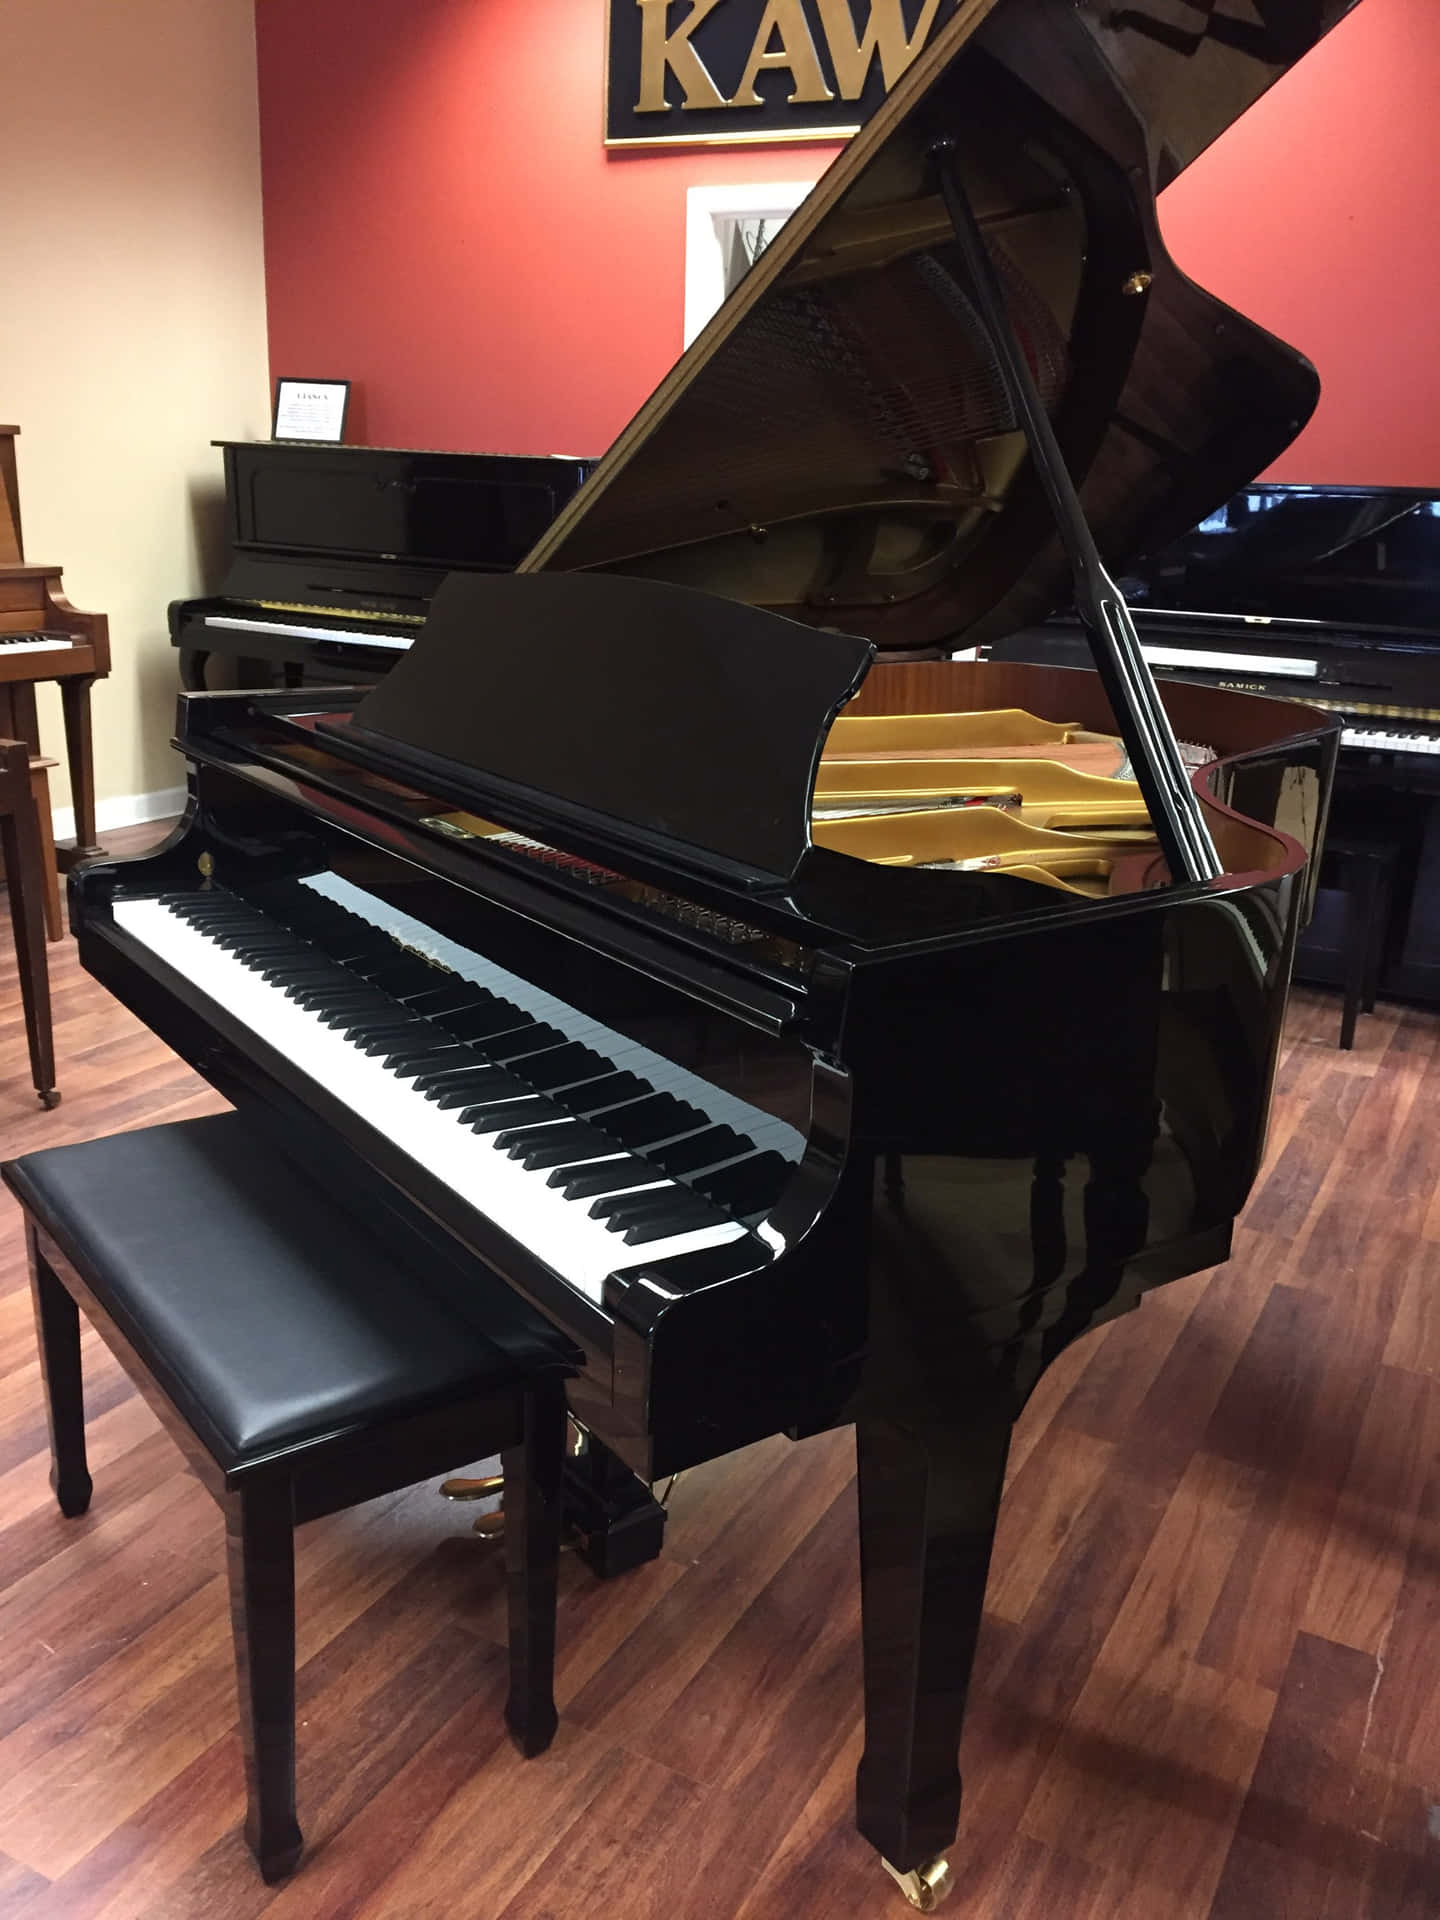 "Achieving musical harmony with a beautiful grand piano."